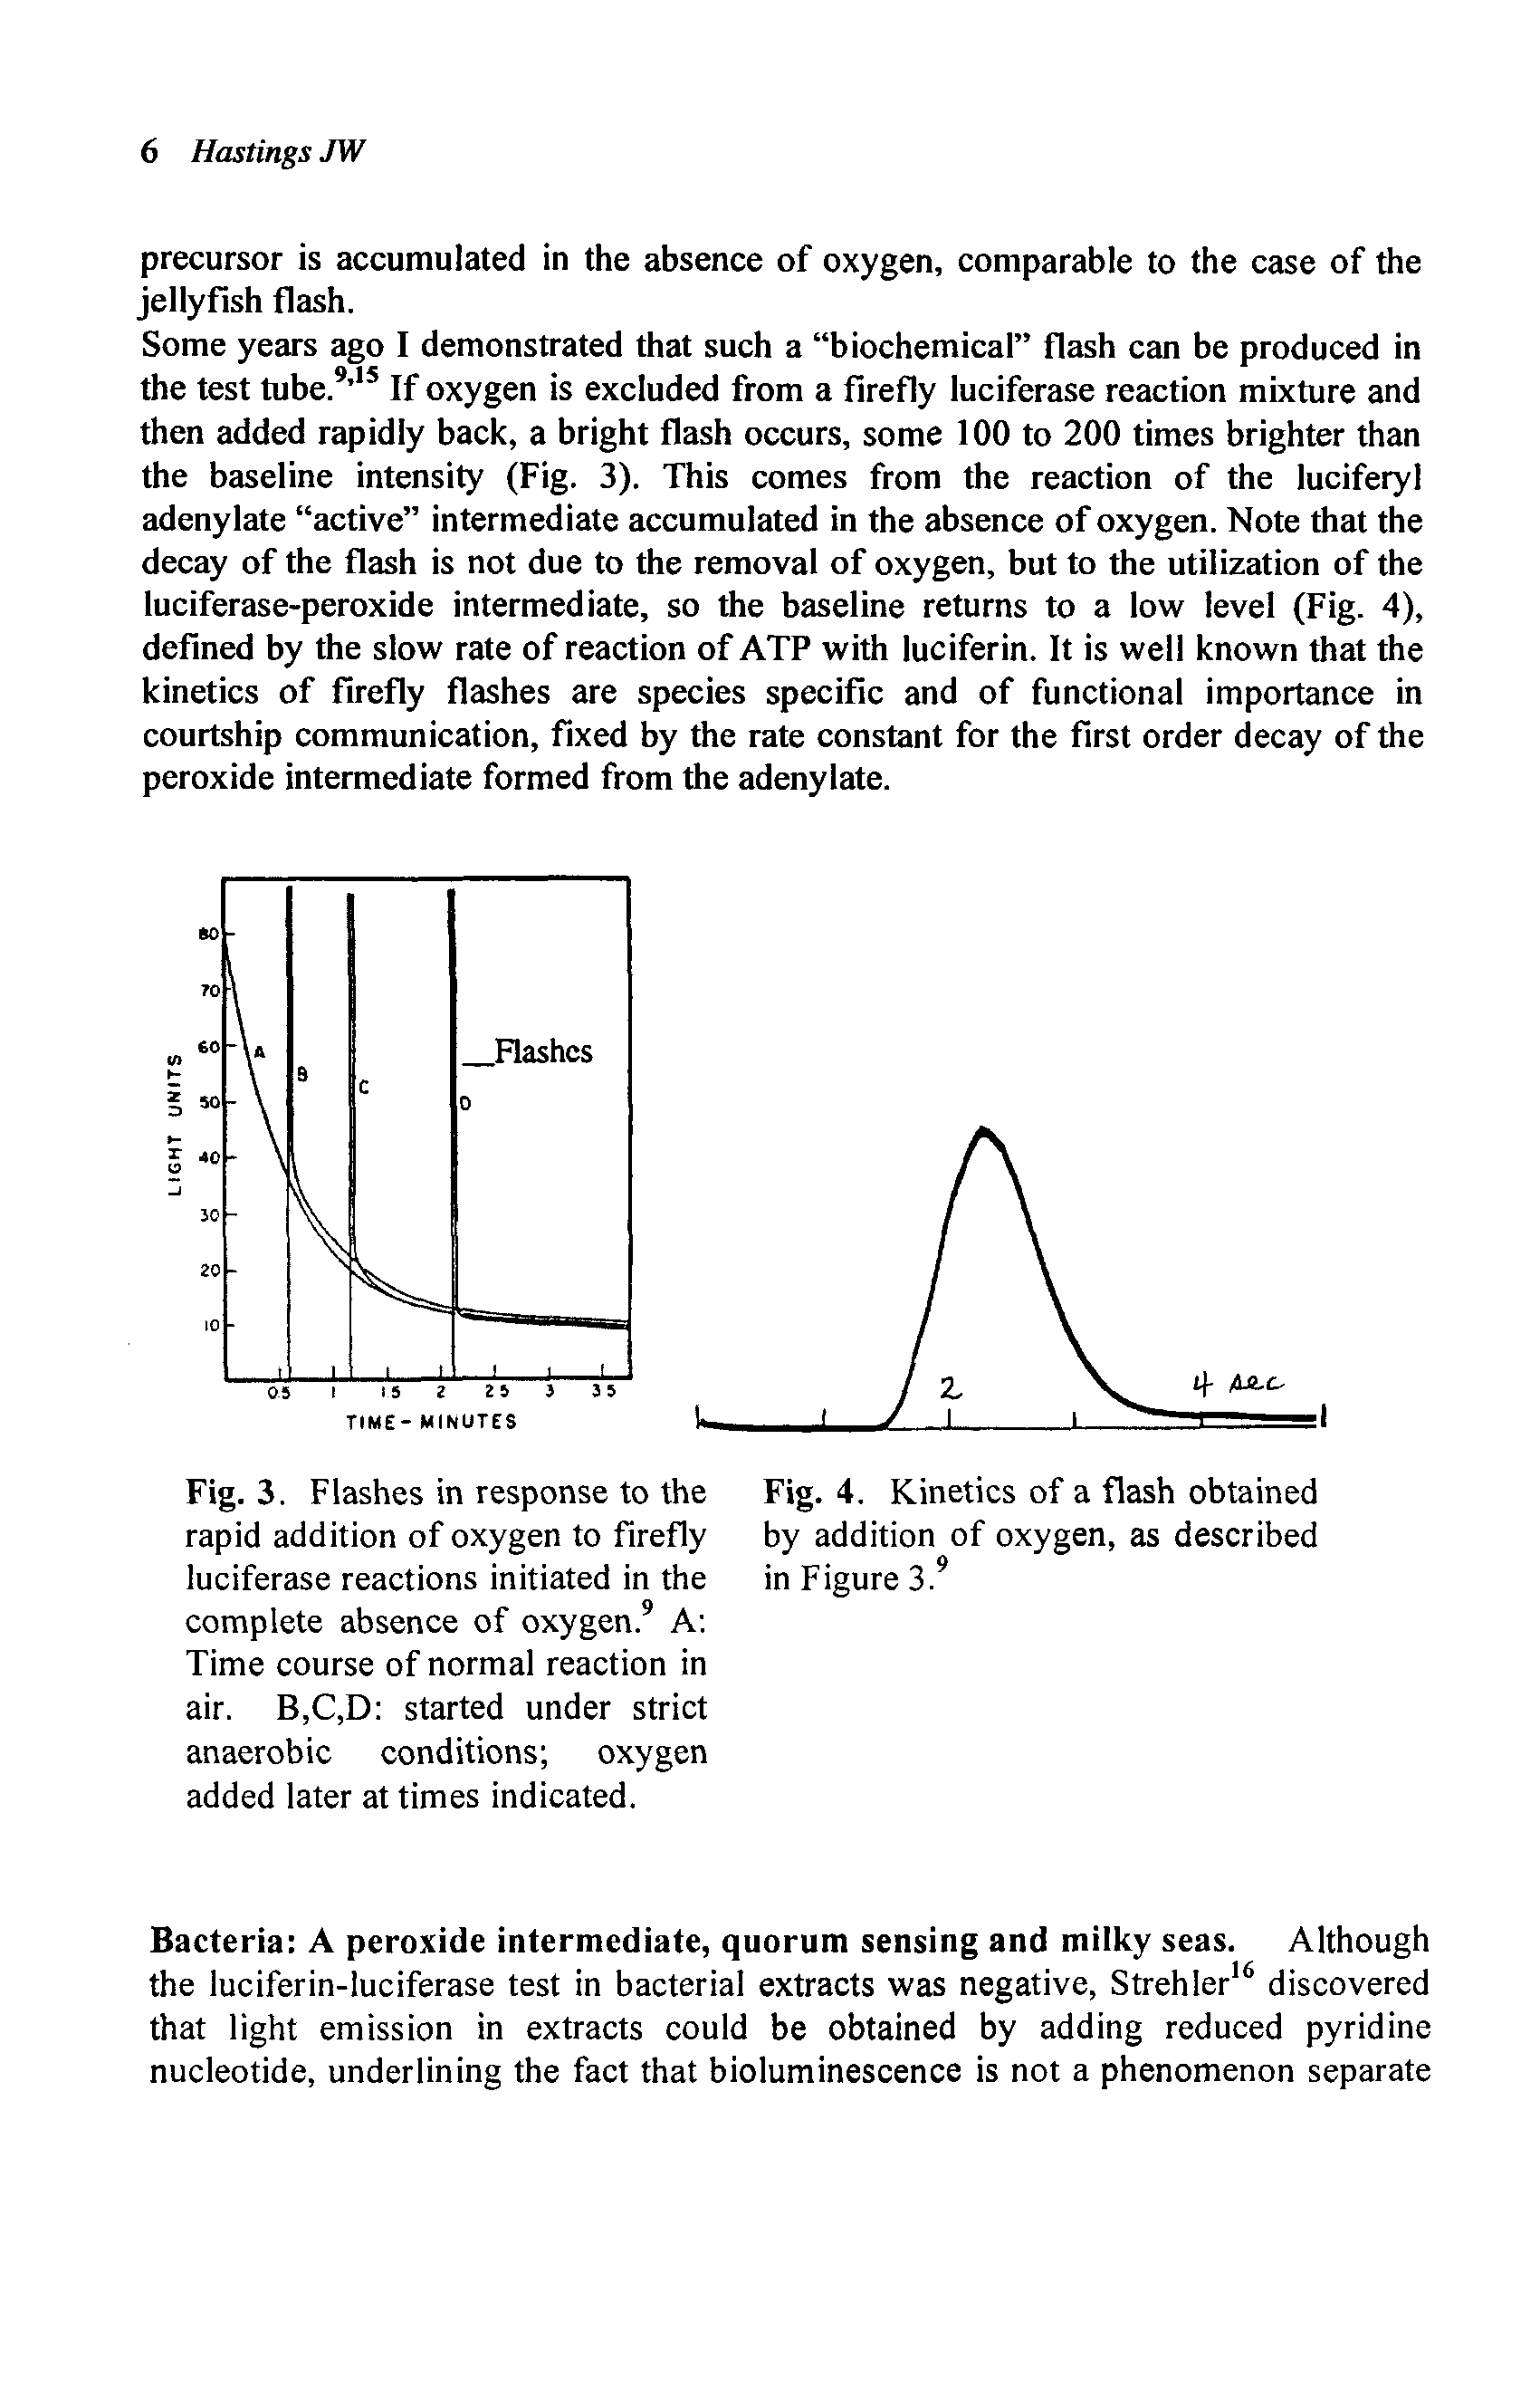 Fig. 3. Flashes in response to the rapid addition of oxygen to firefly luciferase reactions initiated in the complete absence of oxygen.9 A Time course of normal reaction in air. B,C,D started under strict anaerobic conditions oxygen added later at times indicated.